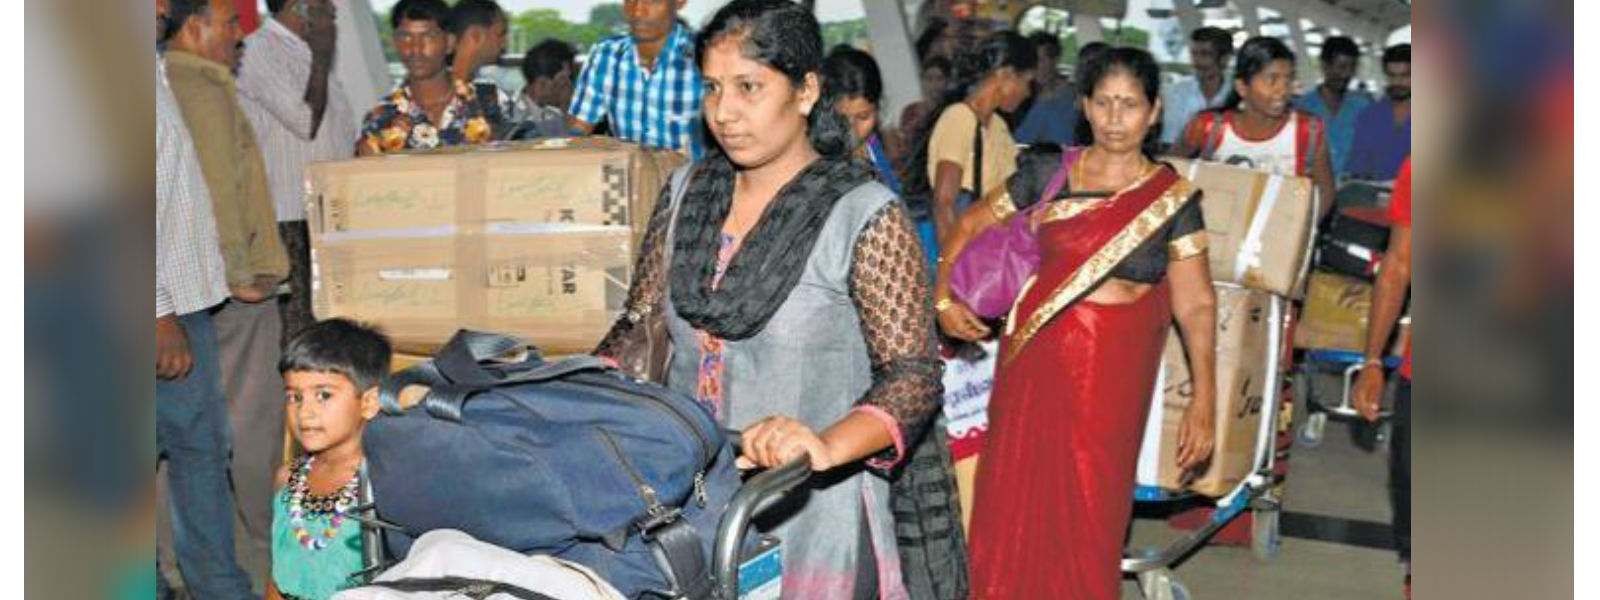 49 Sri Lankan refugees return to the country